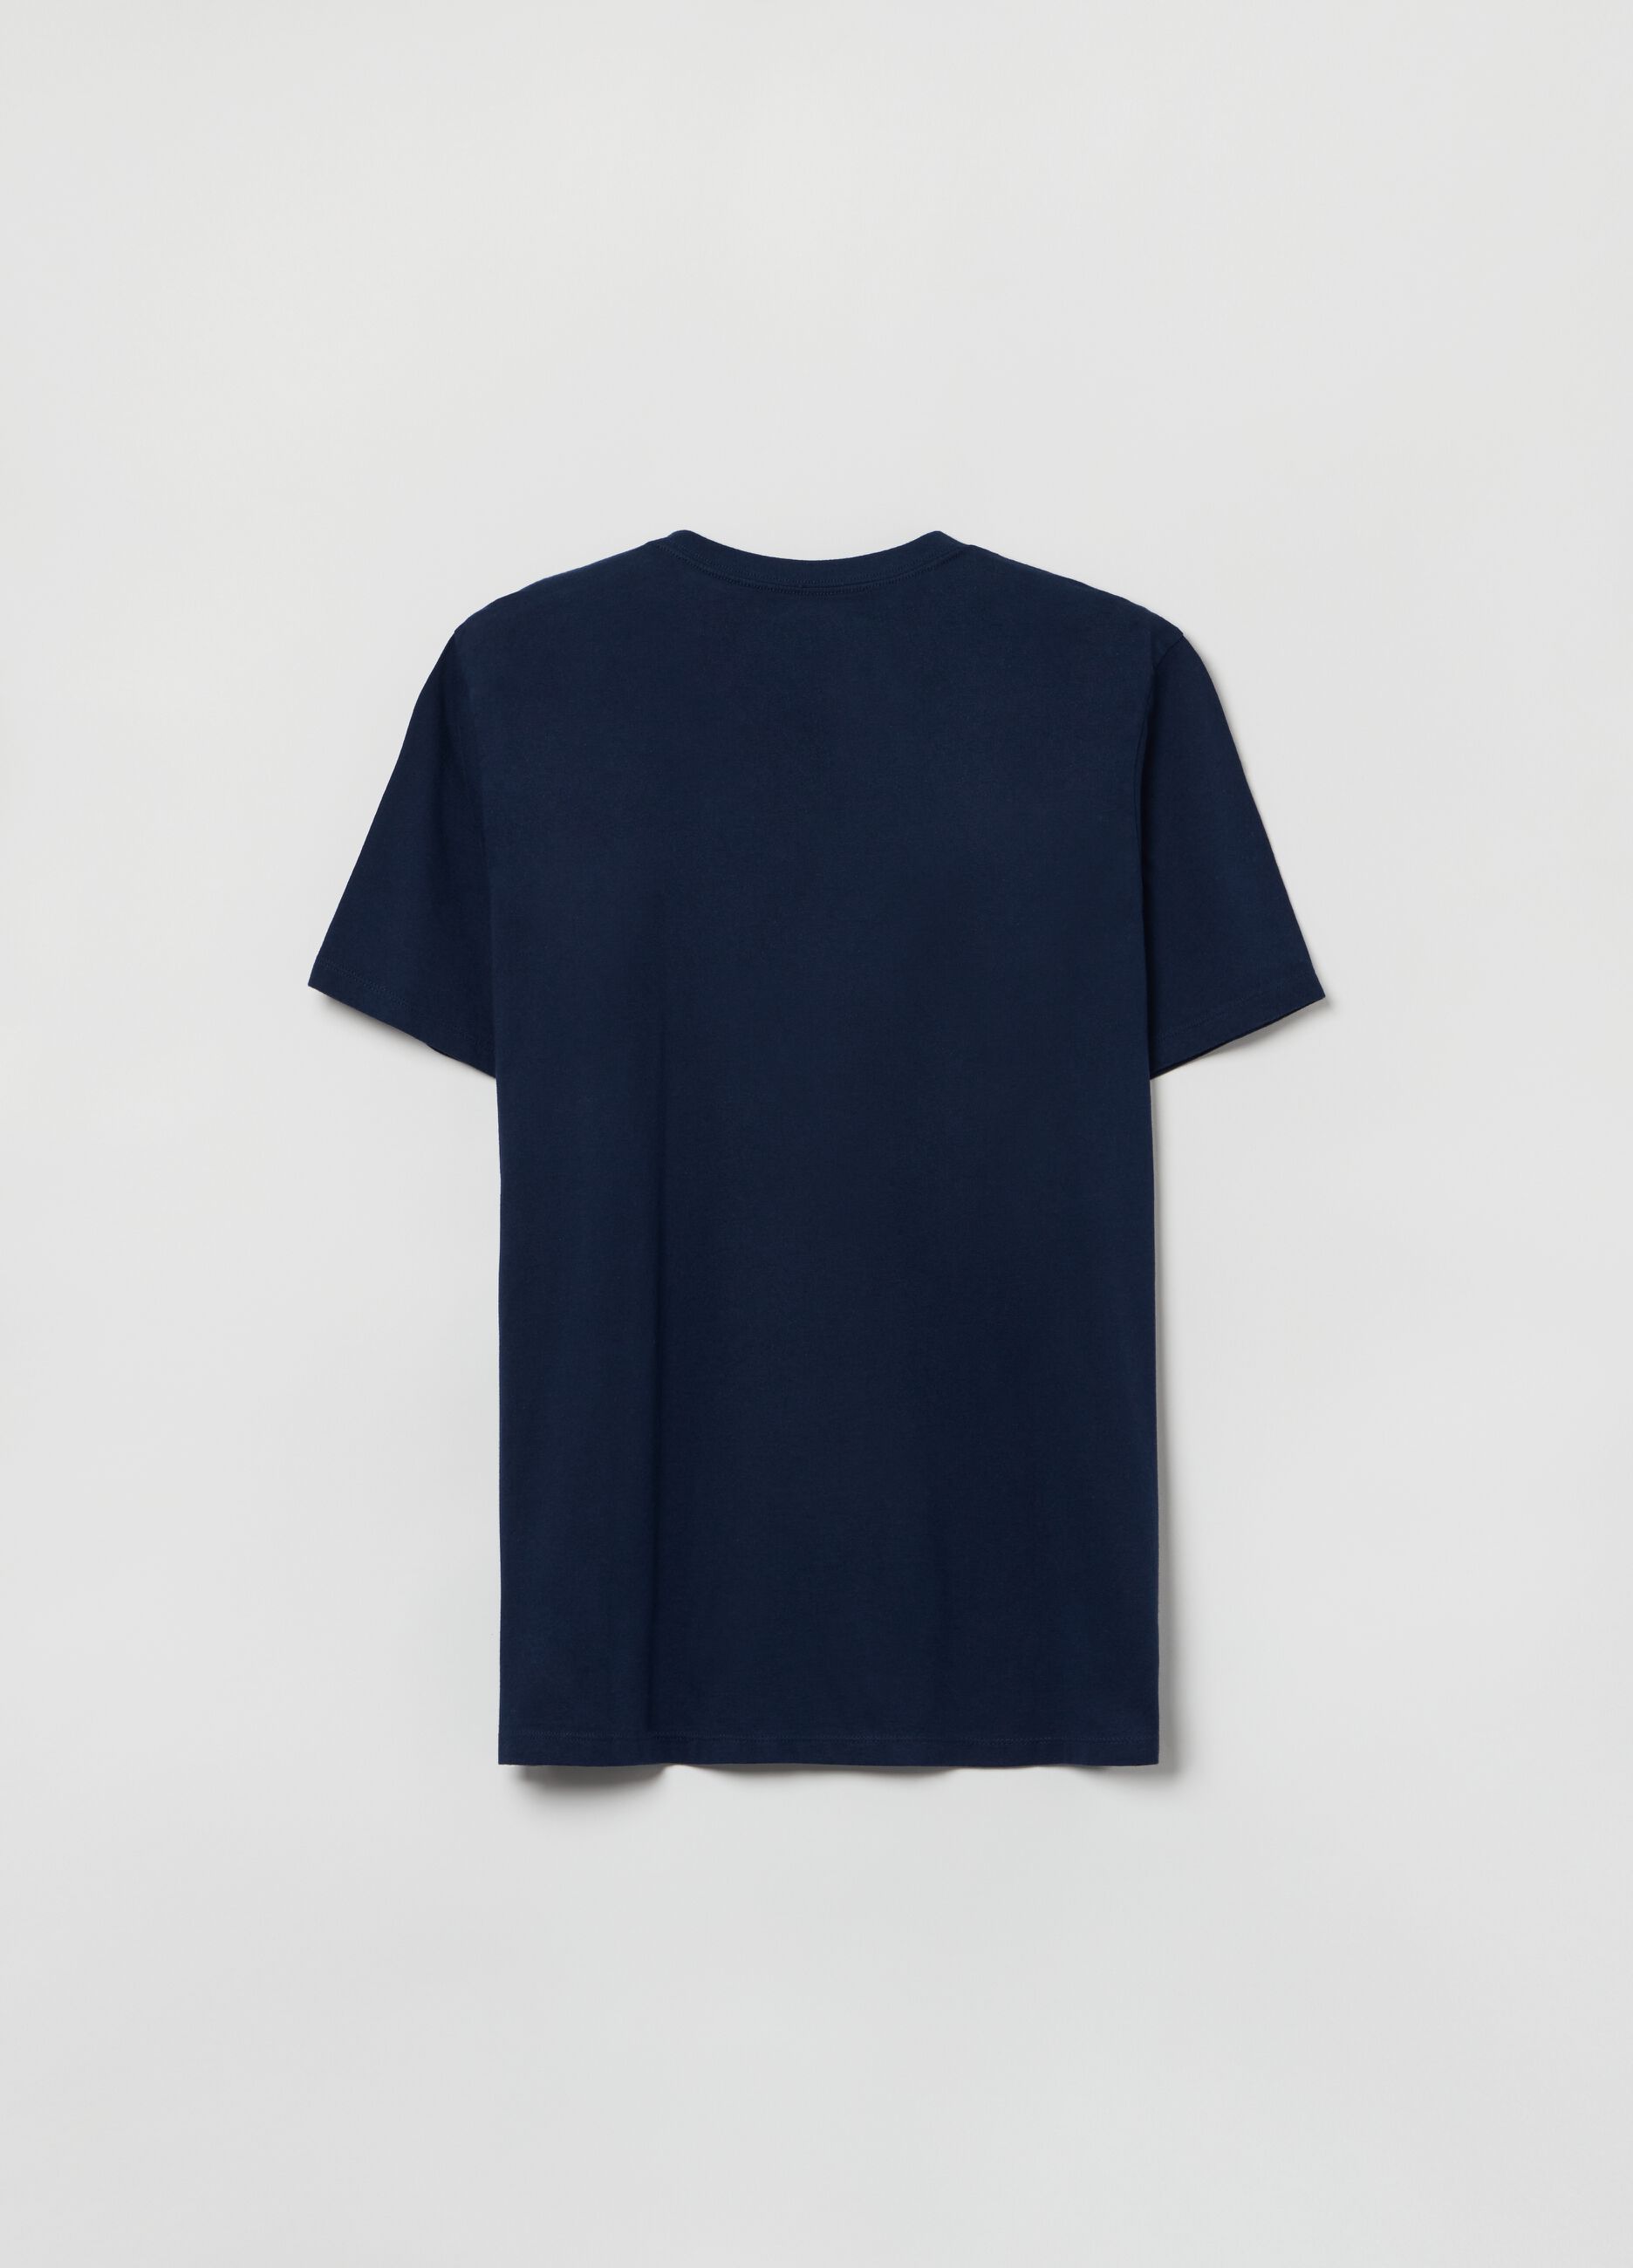 Cotton T-shirt with V neck